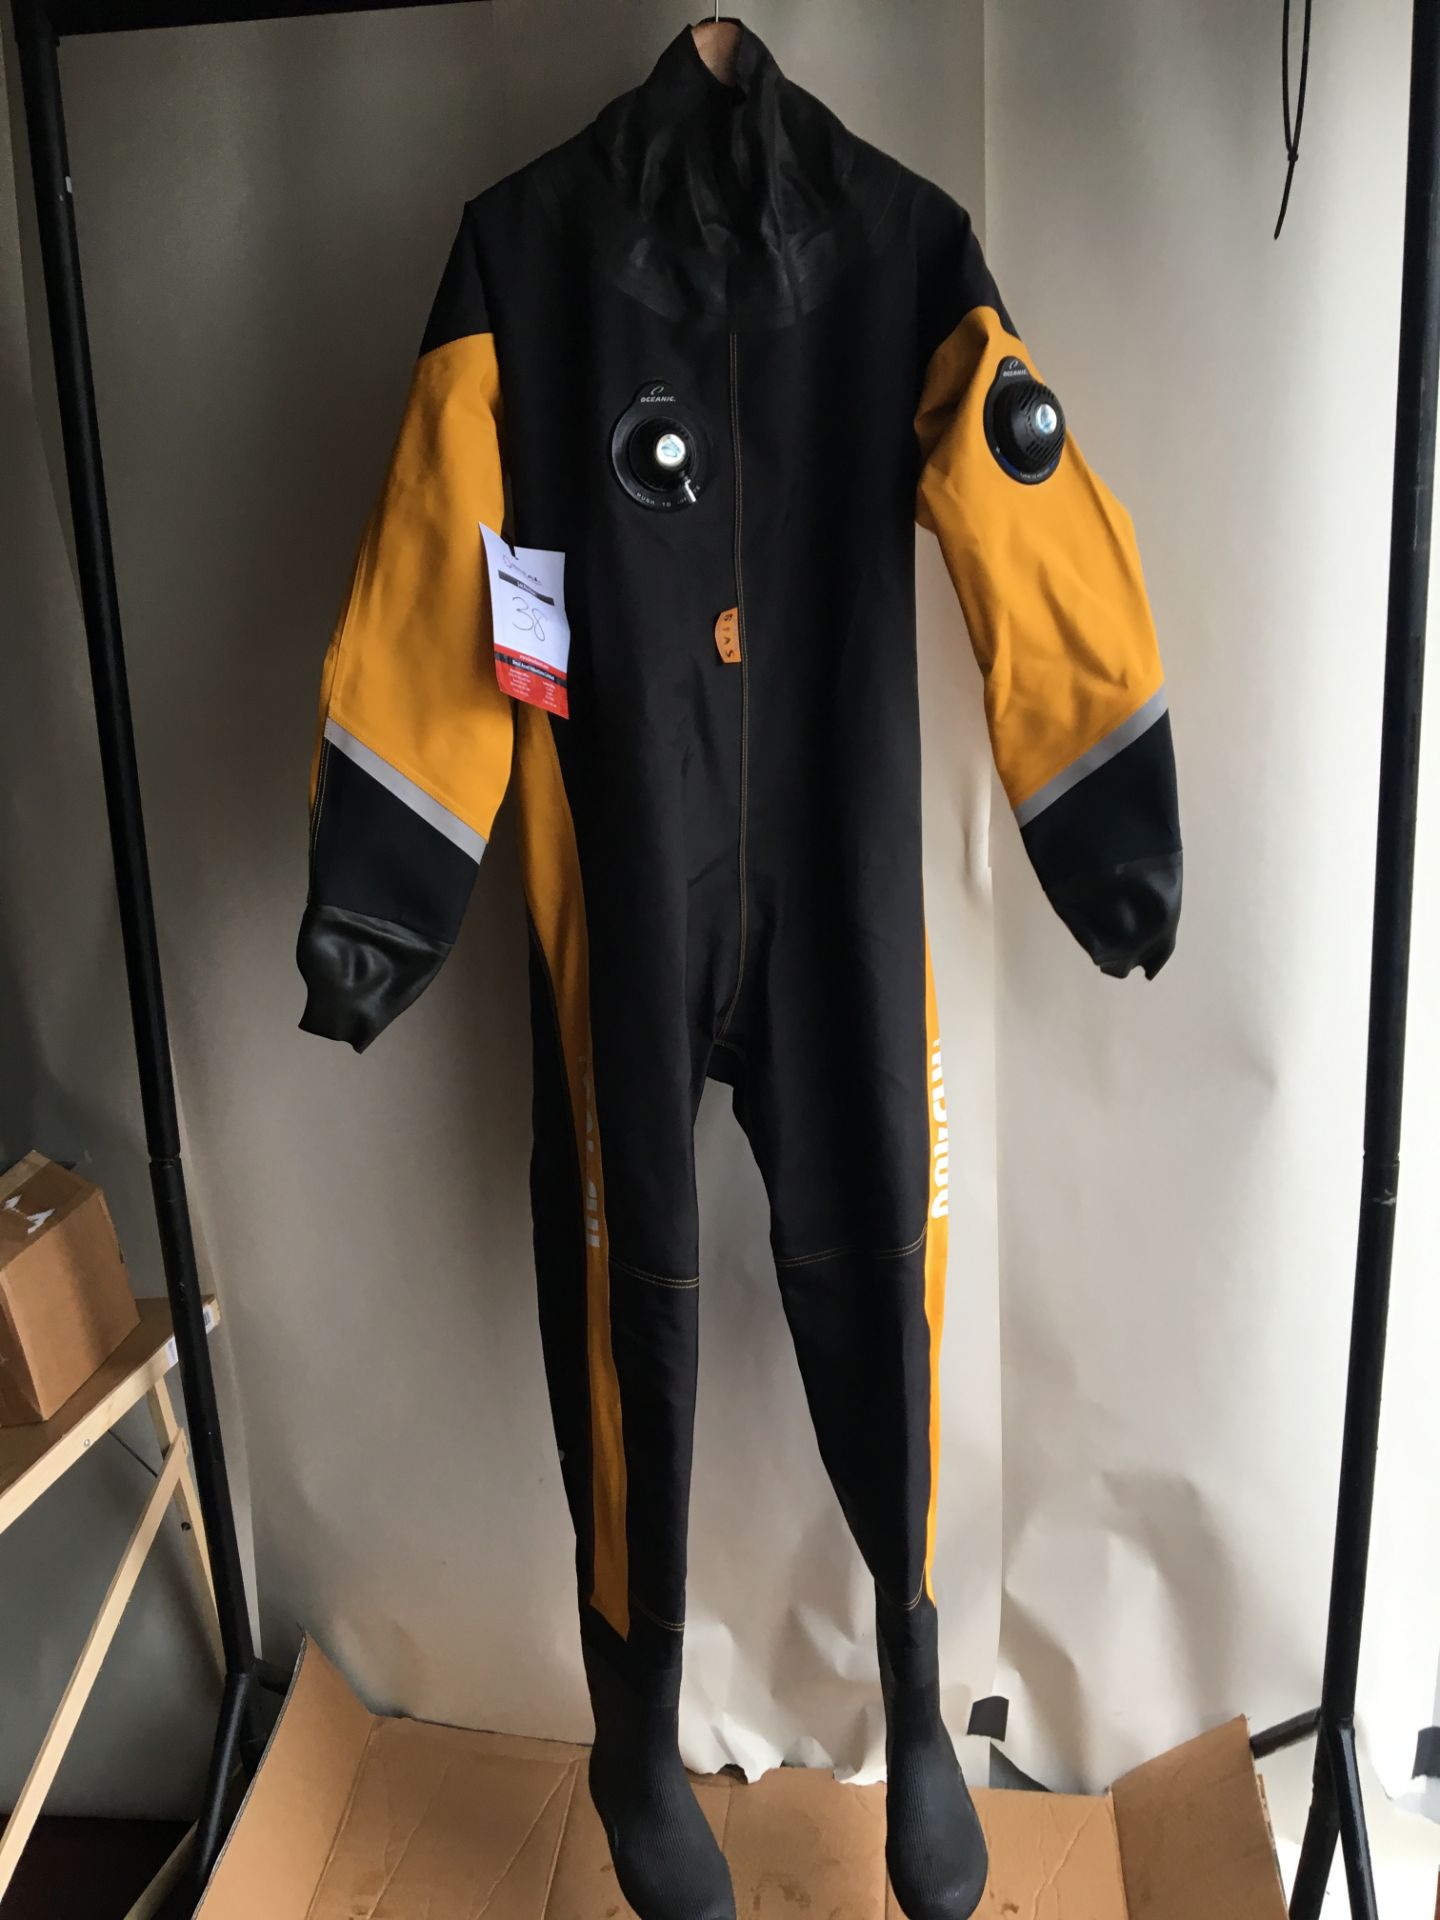 Oceanic HD400 Dry Suit, size M/L, boot size 7 (new)